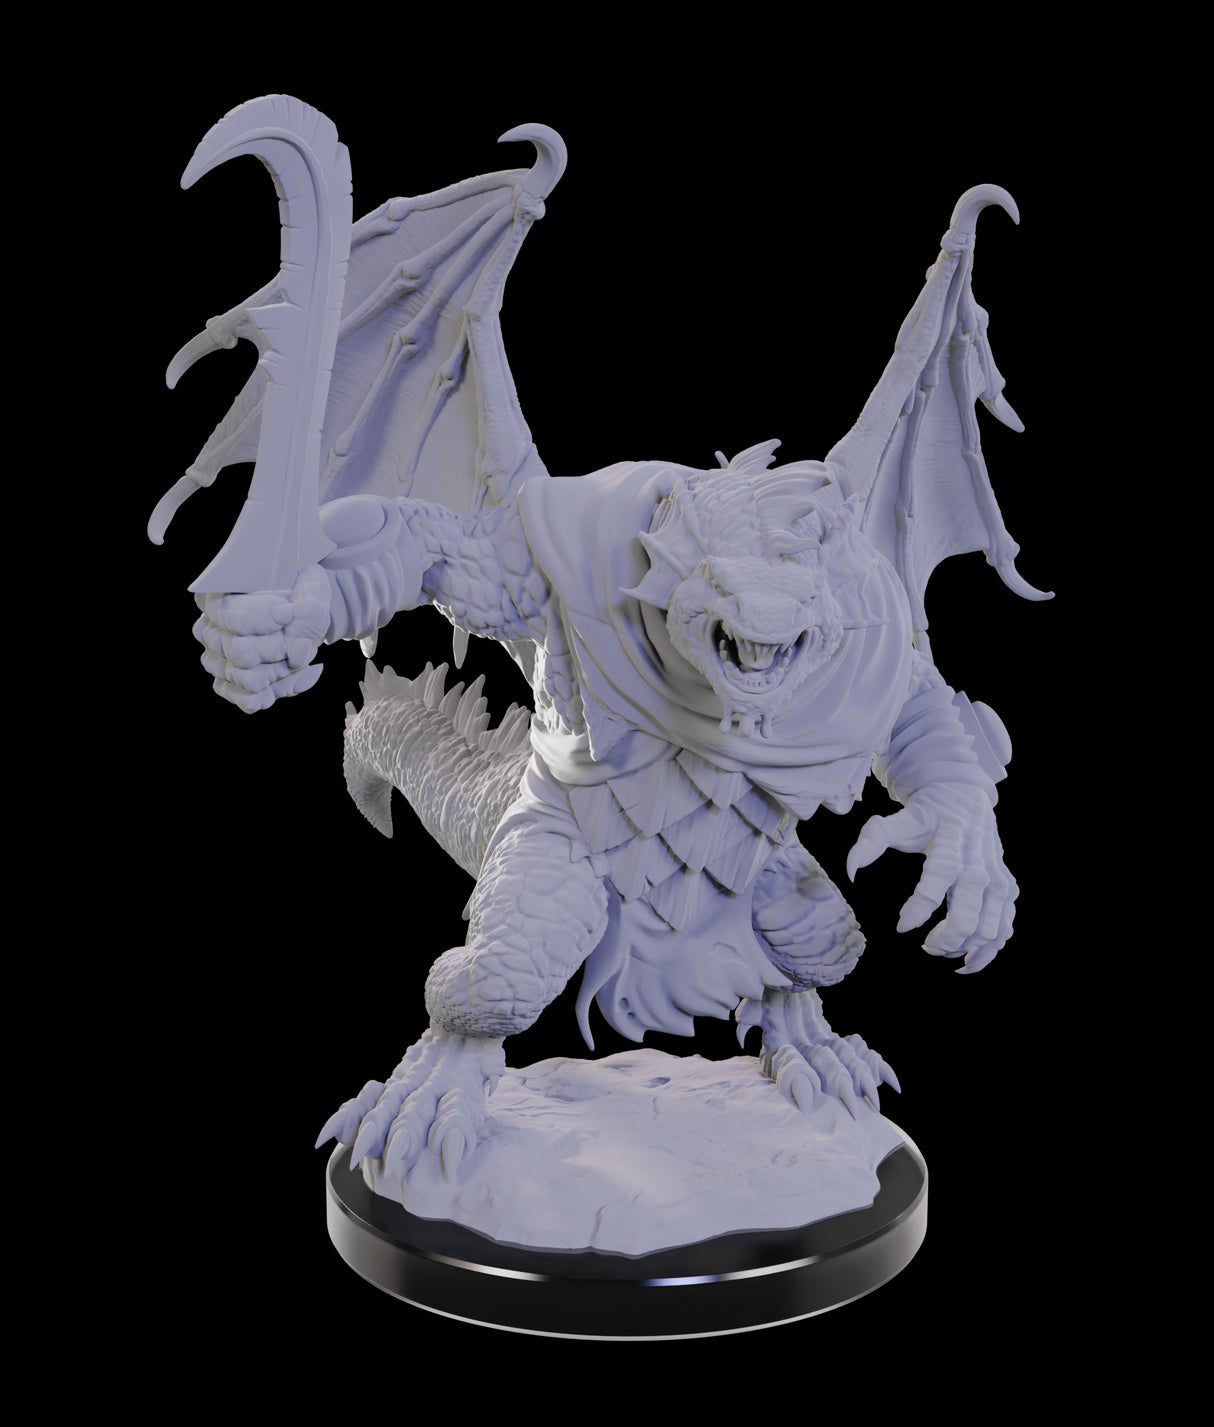 Dungeons & Dragons Nolzur's Marvelous Unpainted Miniatures: W22 Draconian Mage & Foot Soldier